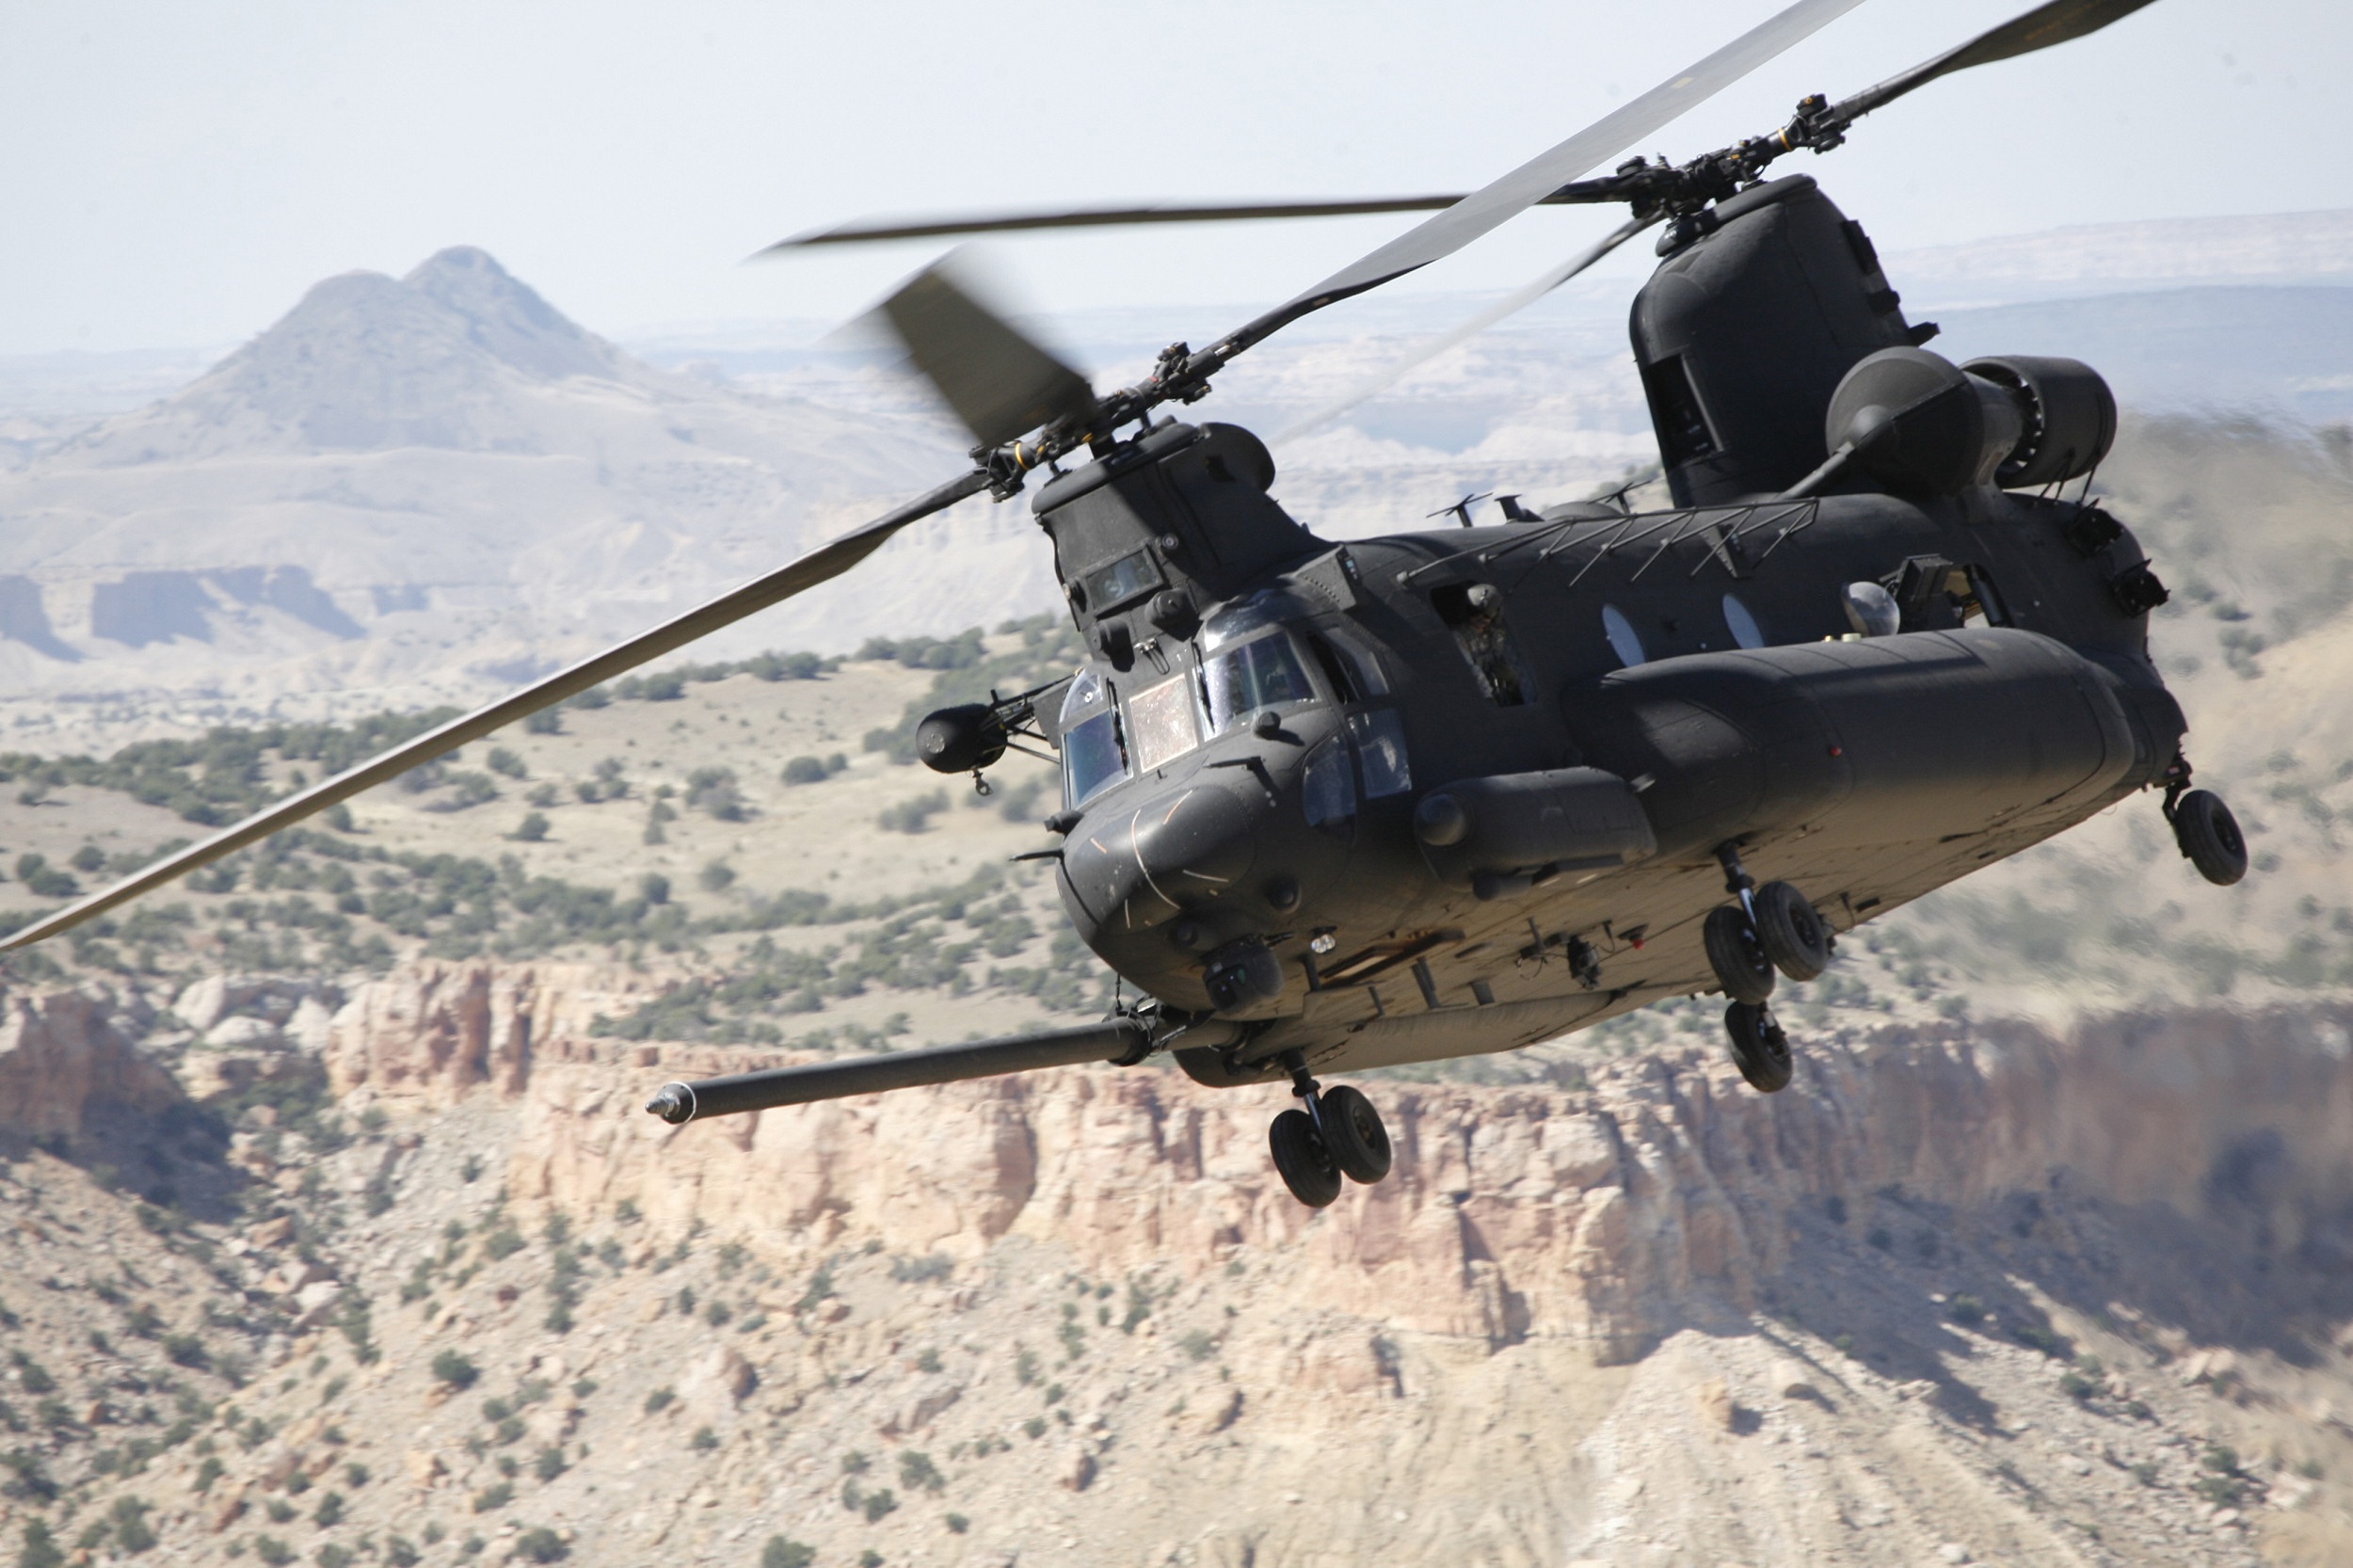 This MH-47 Chinook is an Army helicopter that has been modified for SOF missions. SOCOM’s programs are predominately ACAT III, thereby minimizing statutory requirements and layered oversight. ACAT I platforms such as the Chinook, as well as gunships and maritime vessels, are provided by the services, then modified by SOF AT&L for specific mission requirements. (Photo courtesy of SOF AT&L)